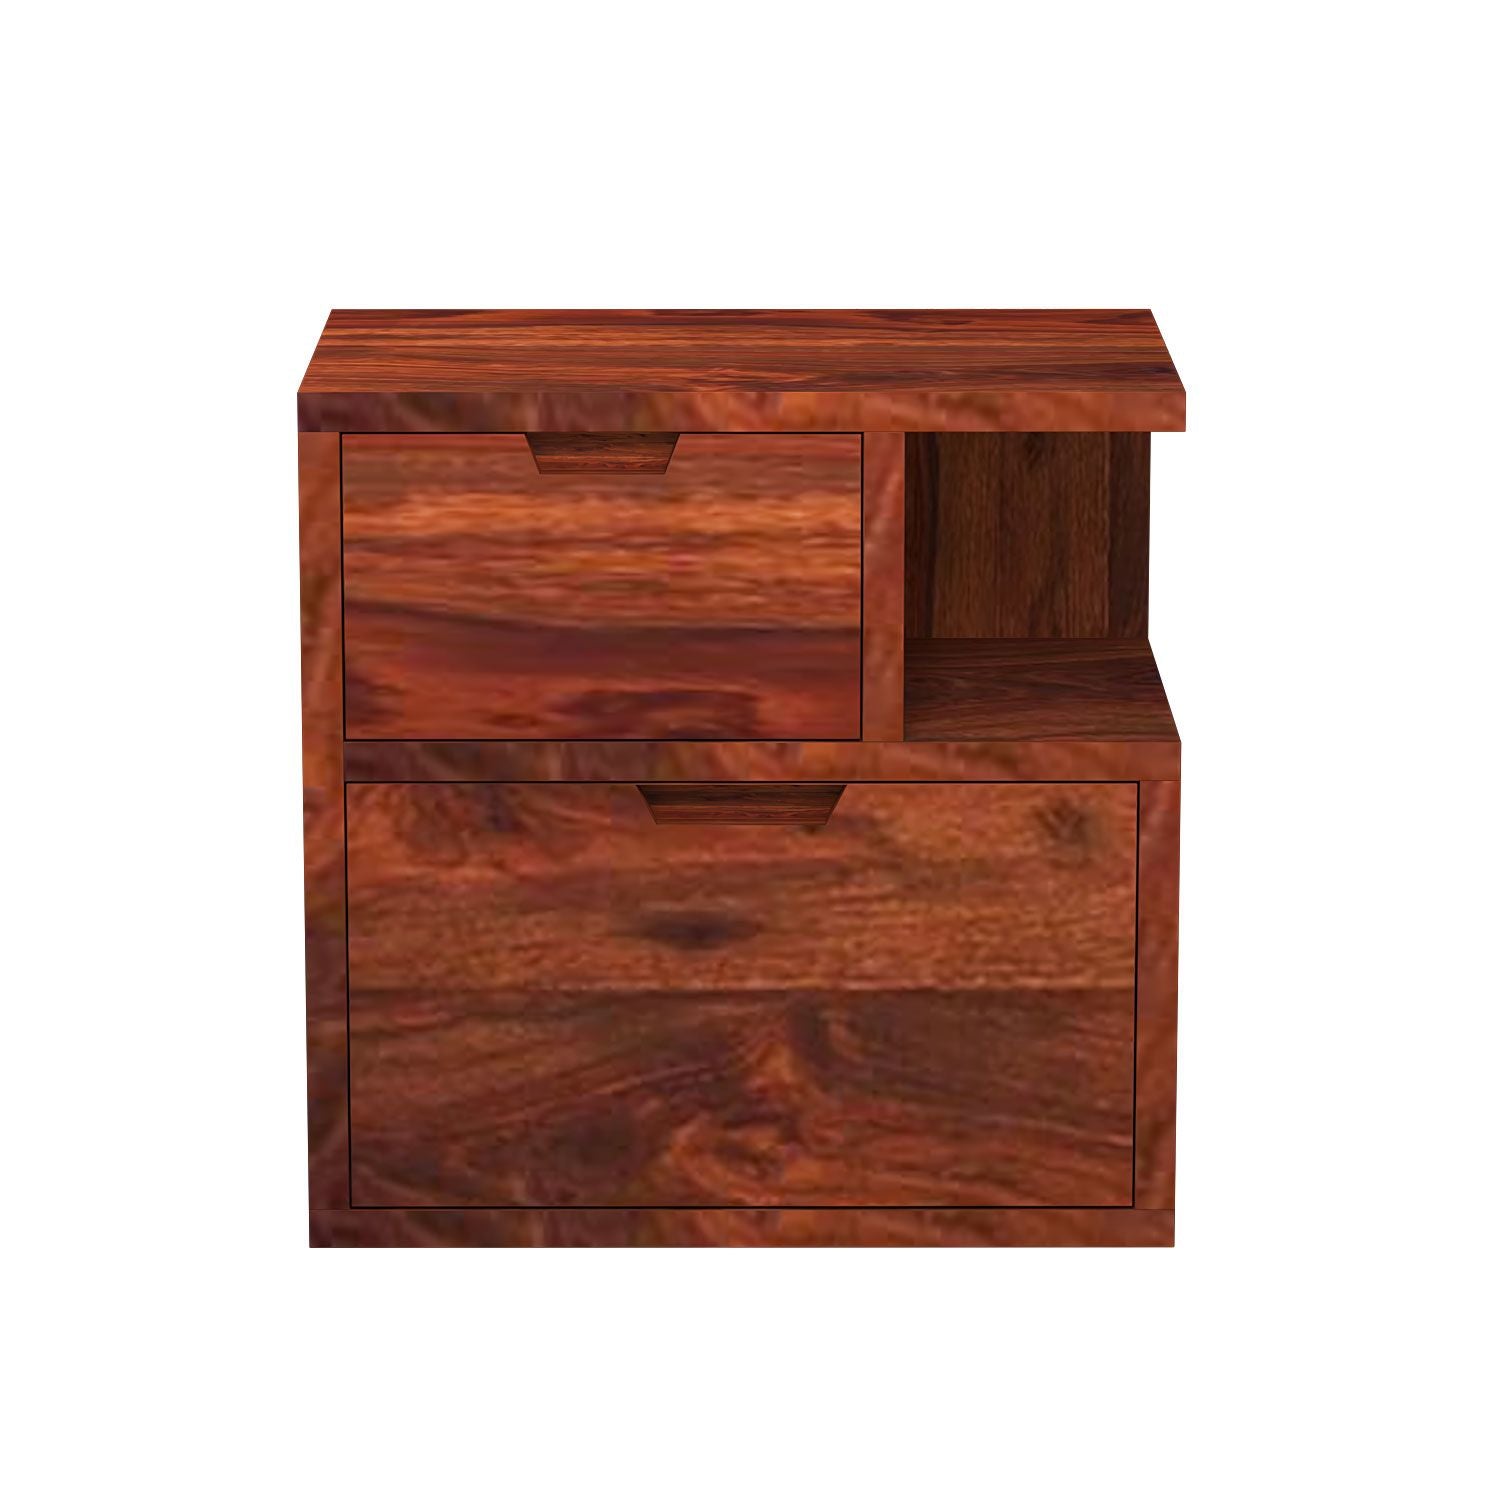 Dumdum Solid Sheesham Wood Bedside Table With Drawers (Natural Finish)